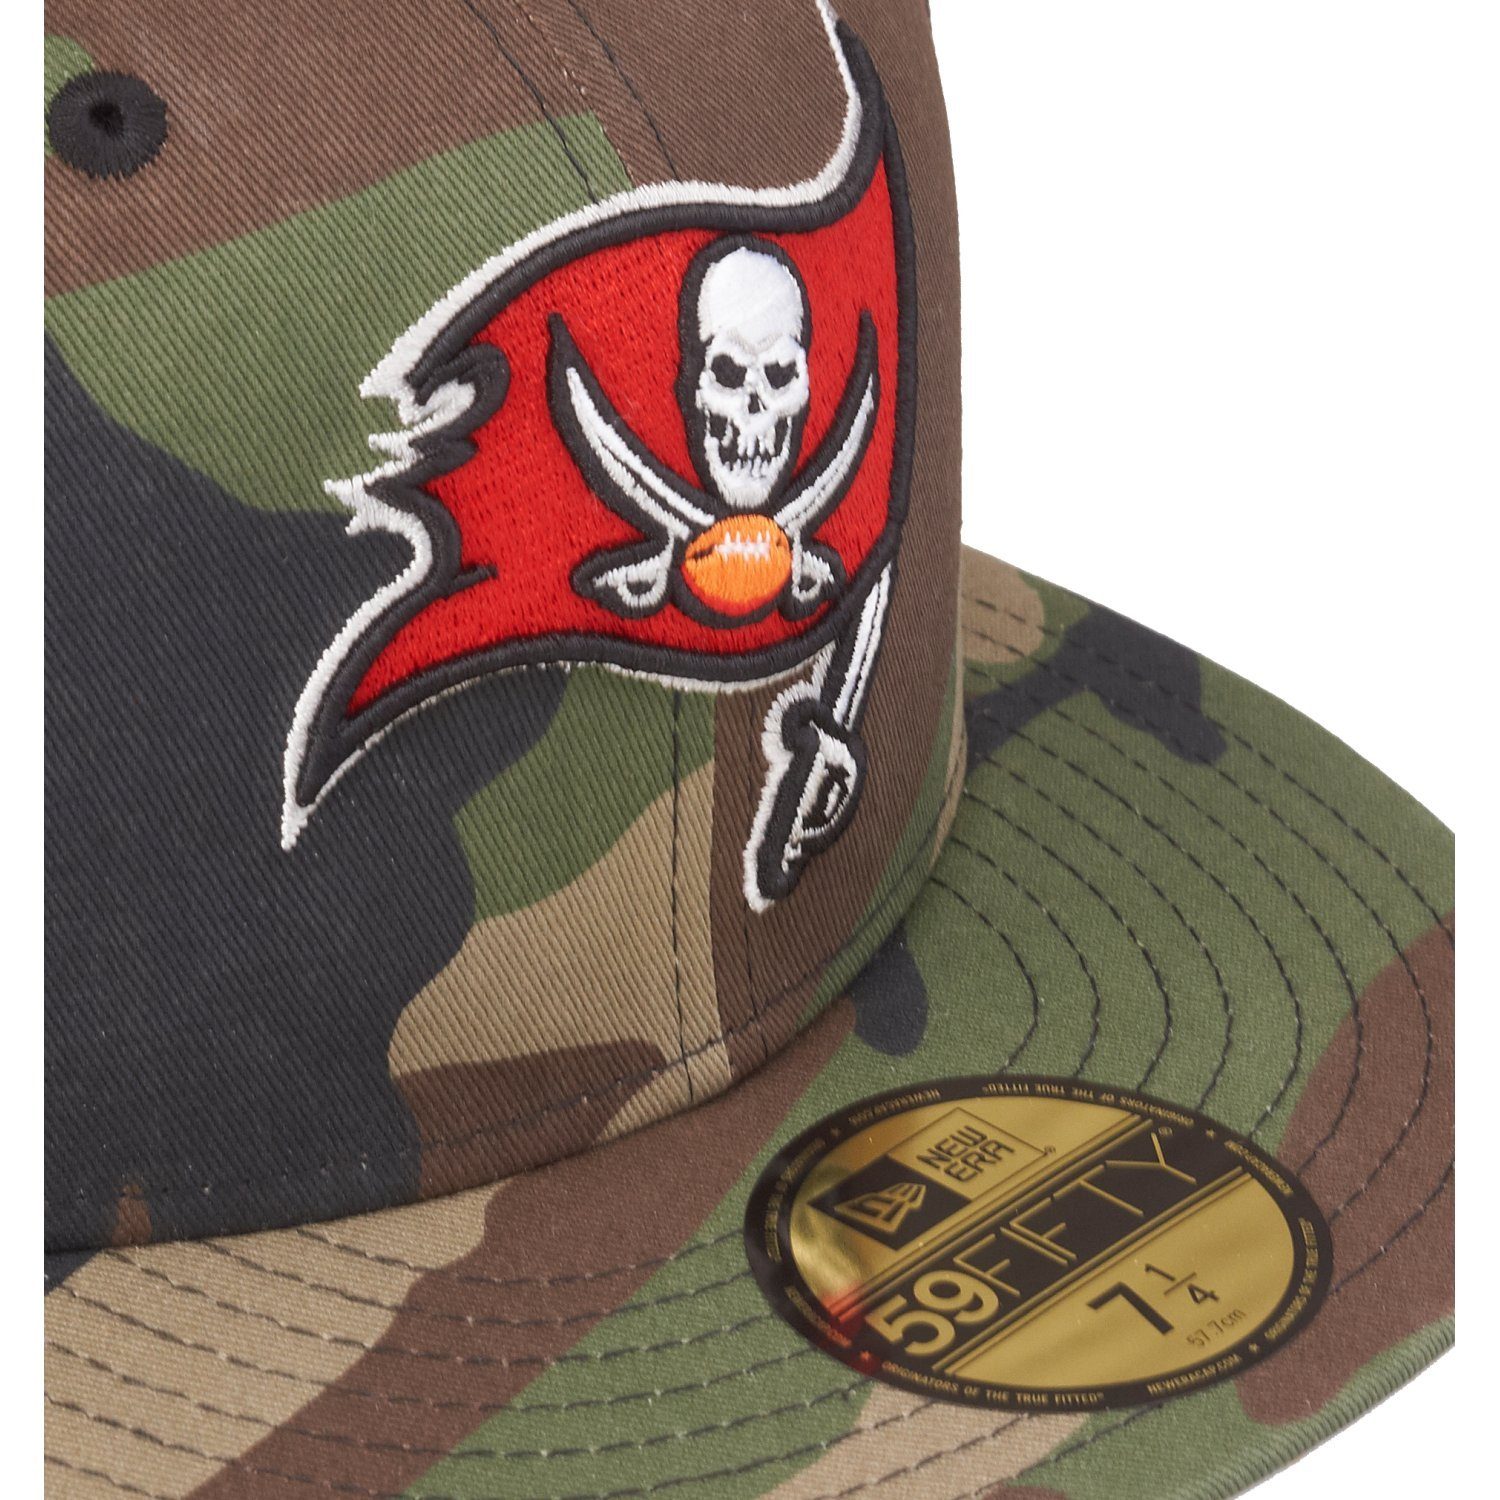 Tampa Fitted New 59Fifty Era Cap Buccaneers Bay